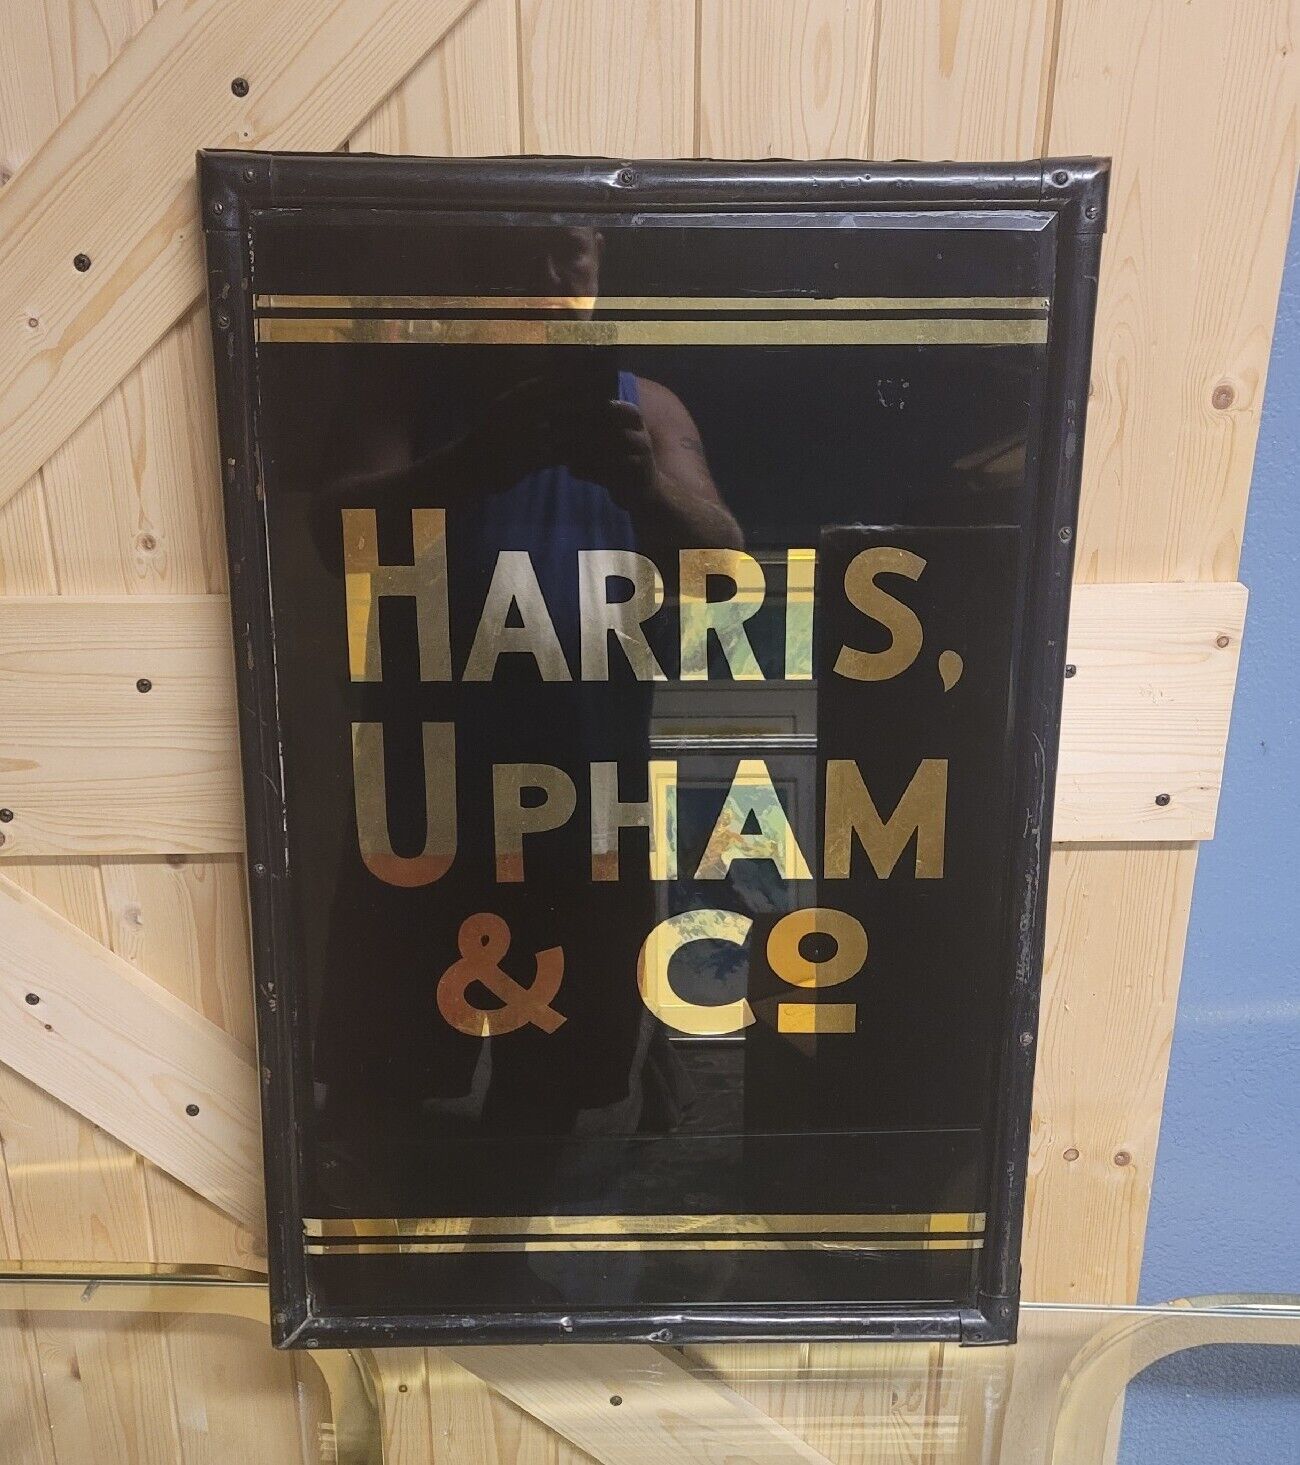 Antique Architecture Harris Upham & Co Sign Wall Street History NYC NYSE